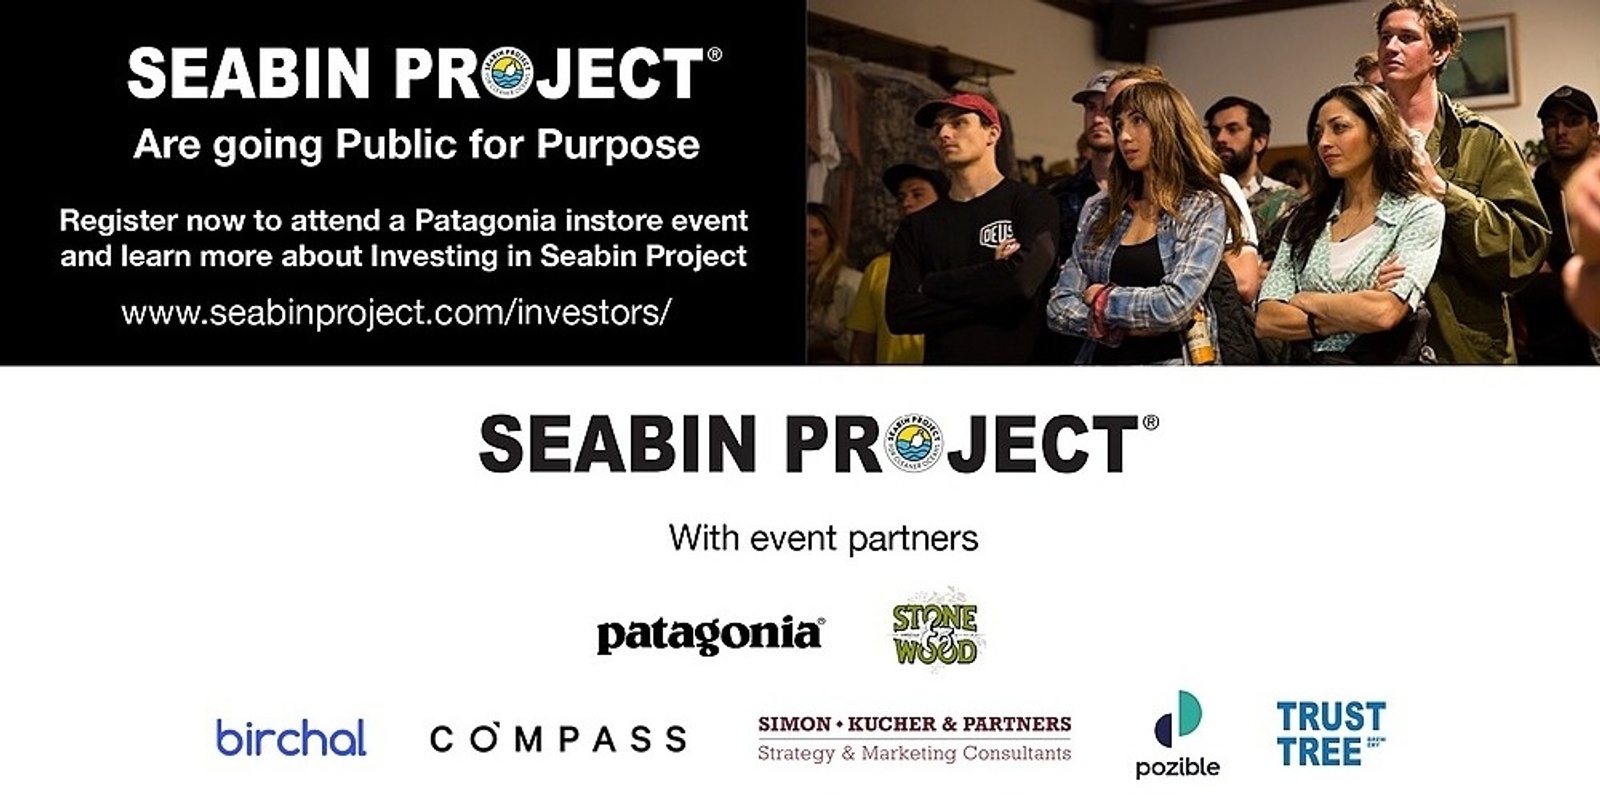 Banner image for Seabin Project - Torquay Surf Coast - Going Public For Purpose